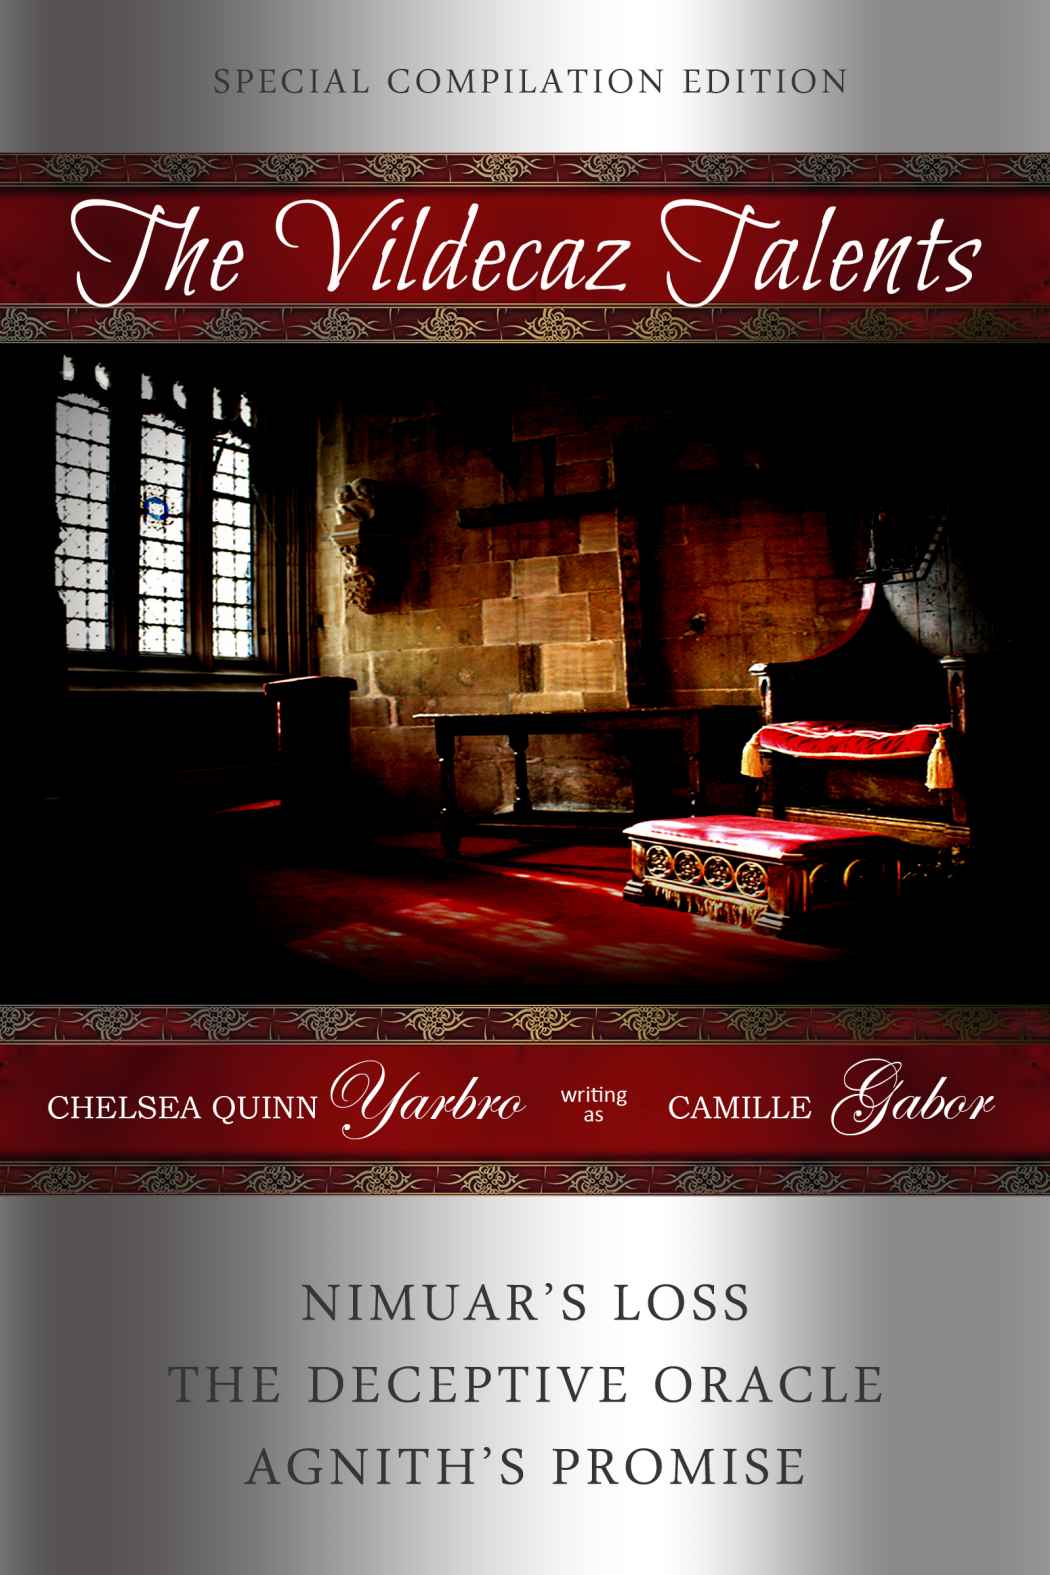 The Vildecaz Talents: The complete set of Vildecaz Stories including Nimuar's Loss, The Deceptive Oracle and Agnith's Promise by Chelsea Quinn Yarbro